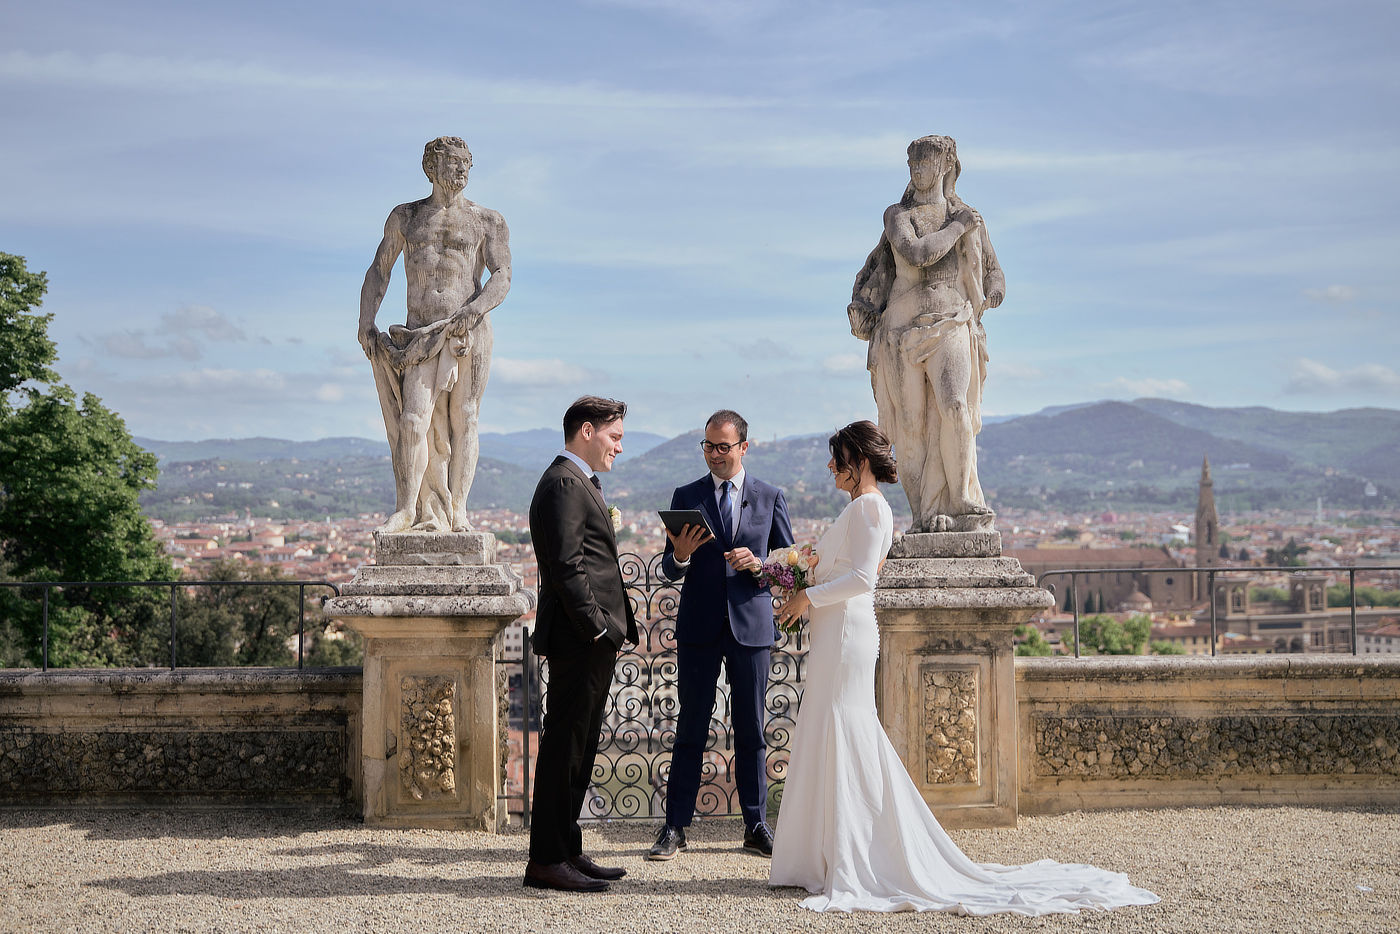 A ceremony in Bardini garden, Florence